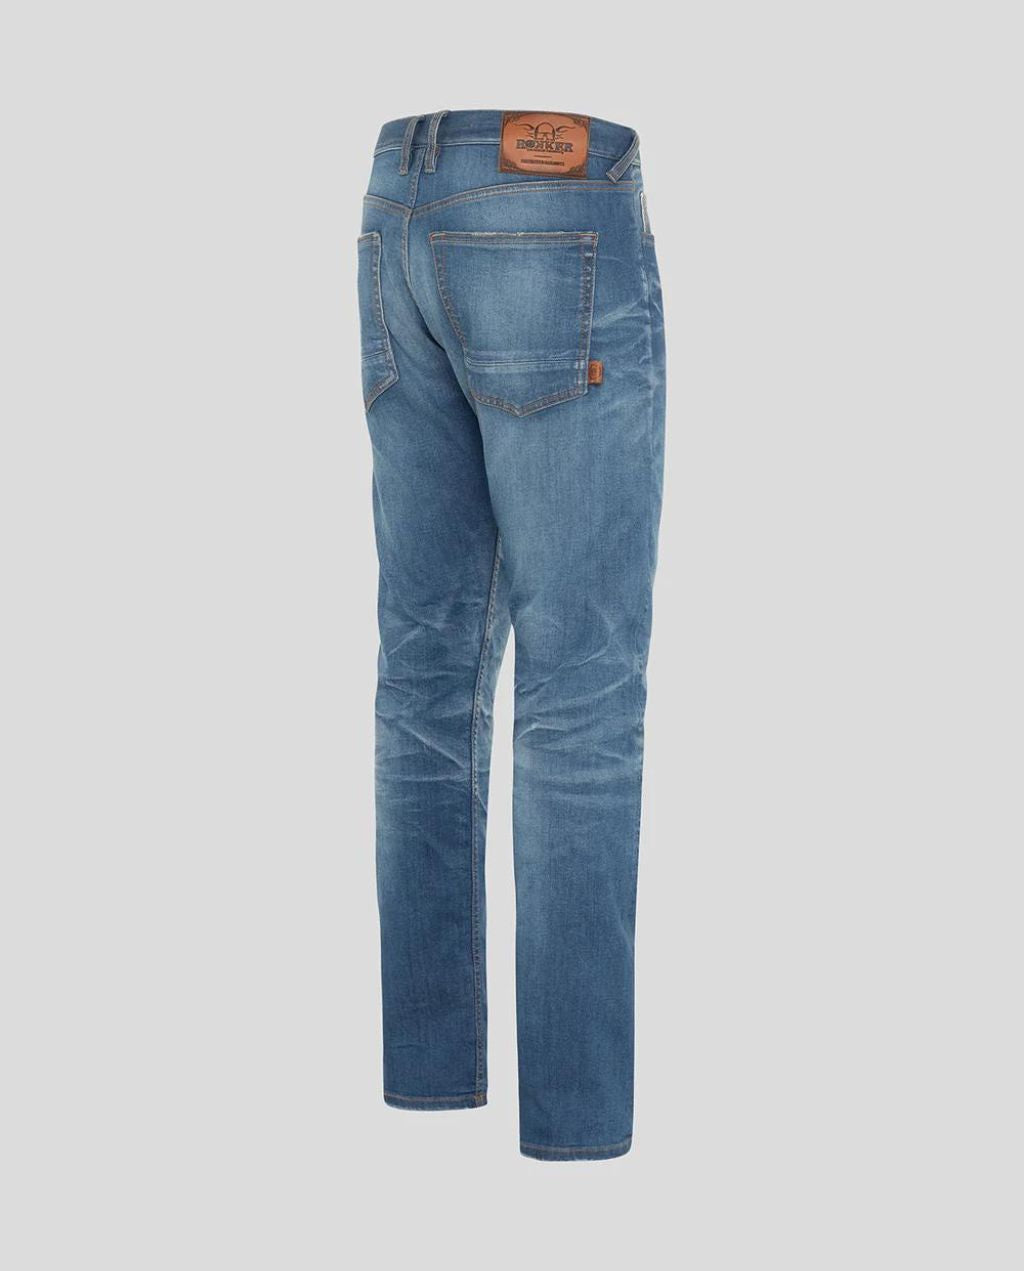 IRON SELVAGE 1054 Limited - 15th Anniversary Edition